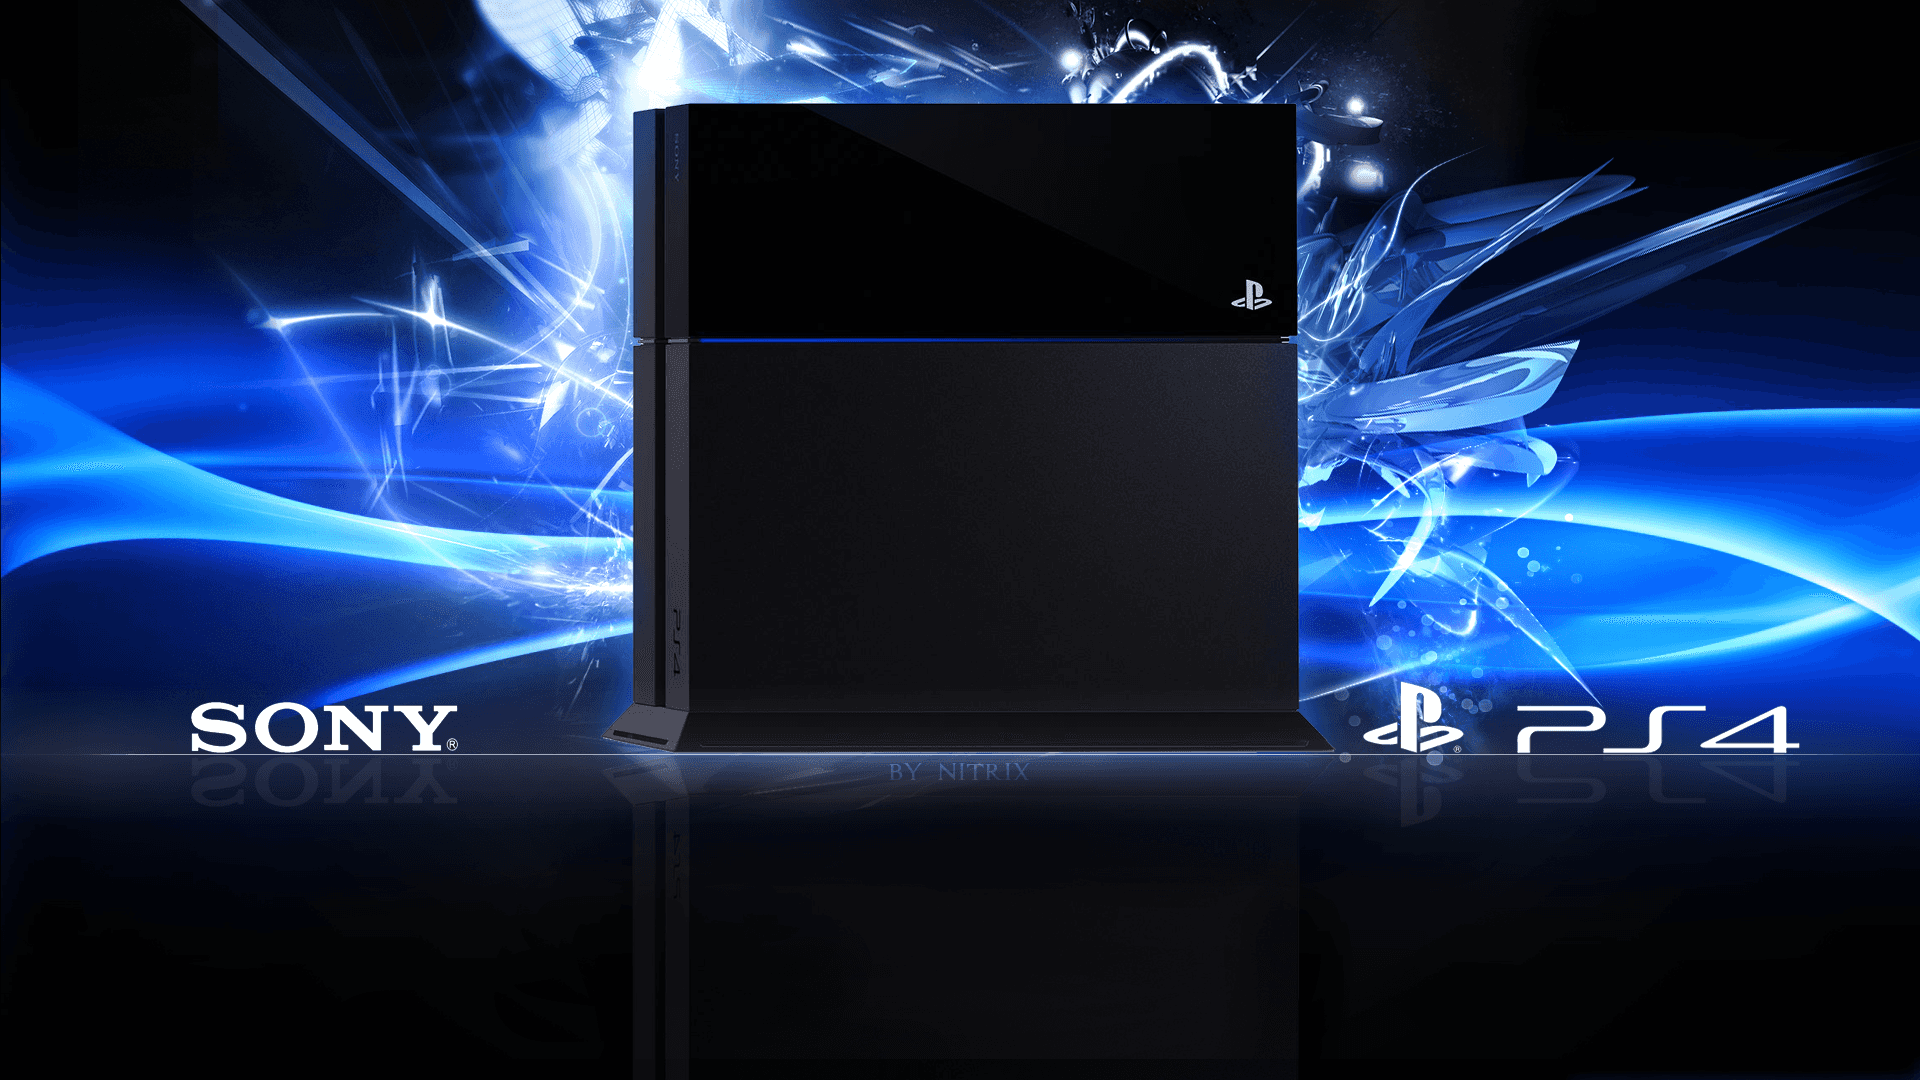 Get lost in the wonders of a mystical night sky with a PS4